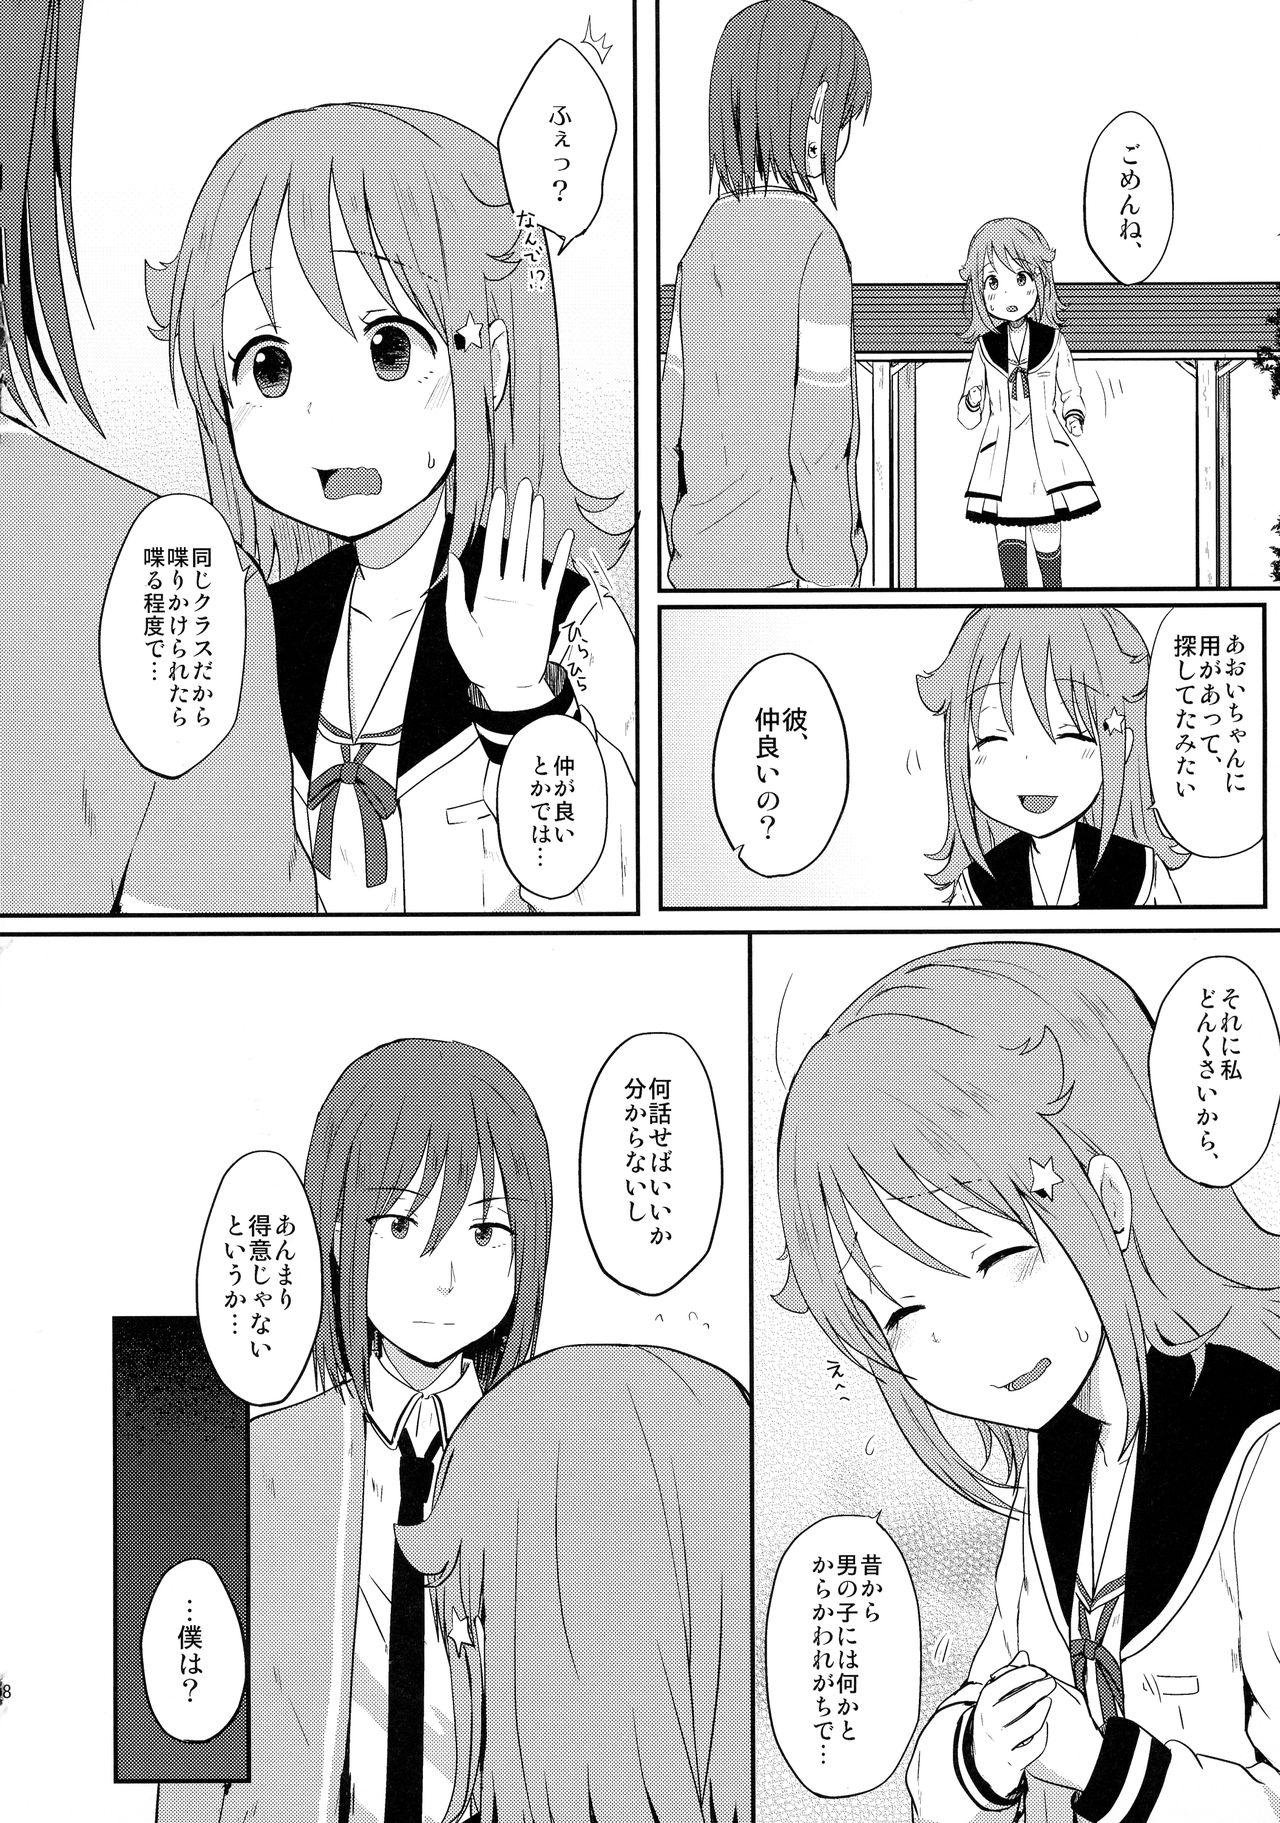 Chick Nowhere land 2 - Houkago no pleiades Full Movie - Page 8